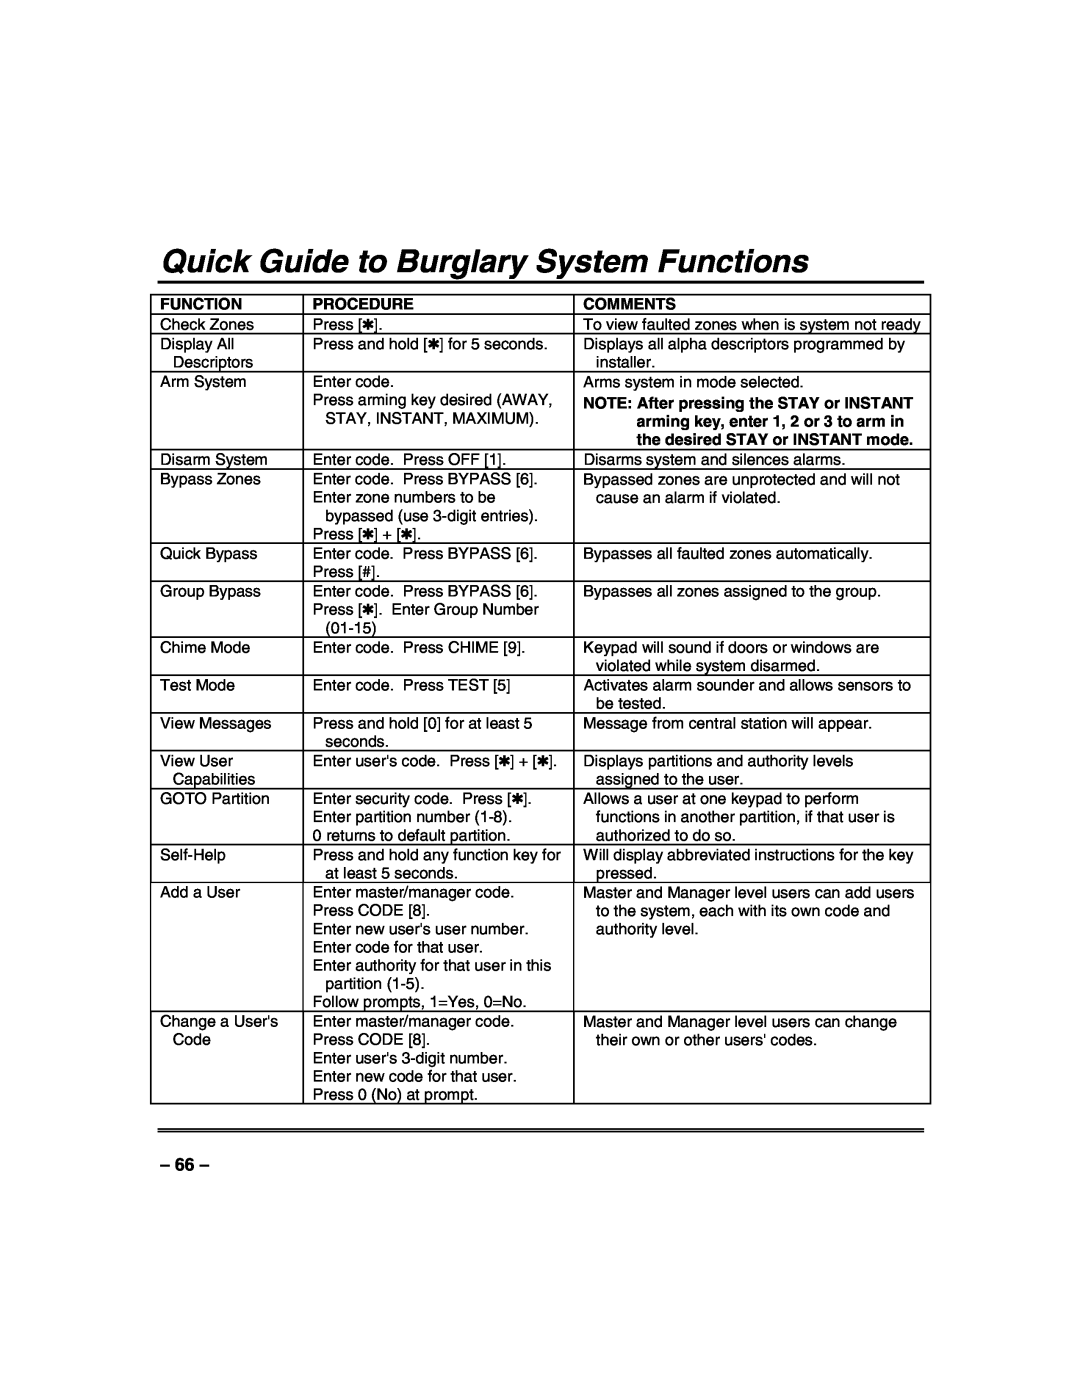 Honeywell VISTA-250FBP Quick Guide to Burglary System Functions, Procedure, Comments, the desired STAY or INSTANT mode 